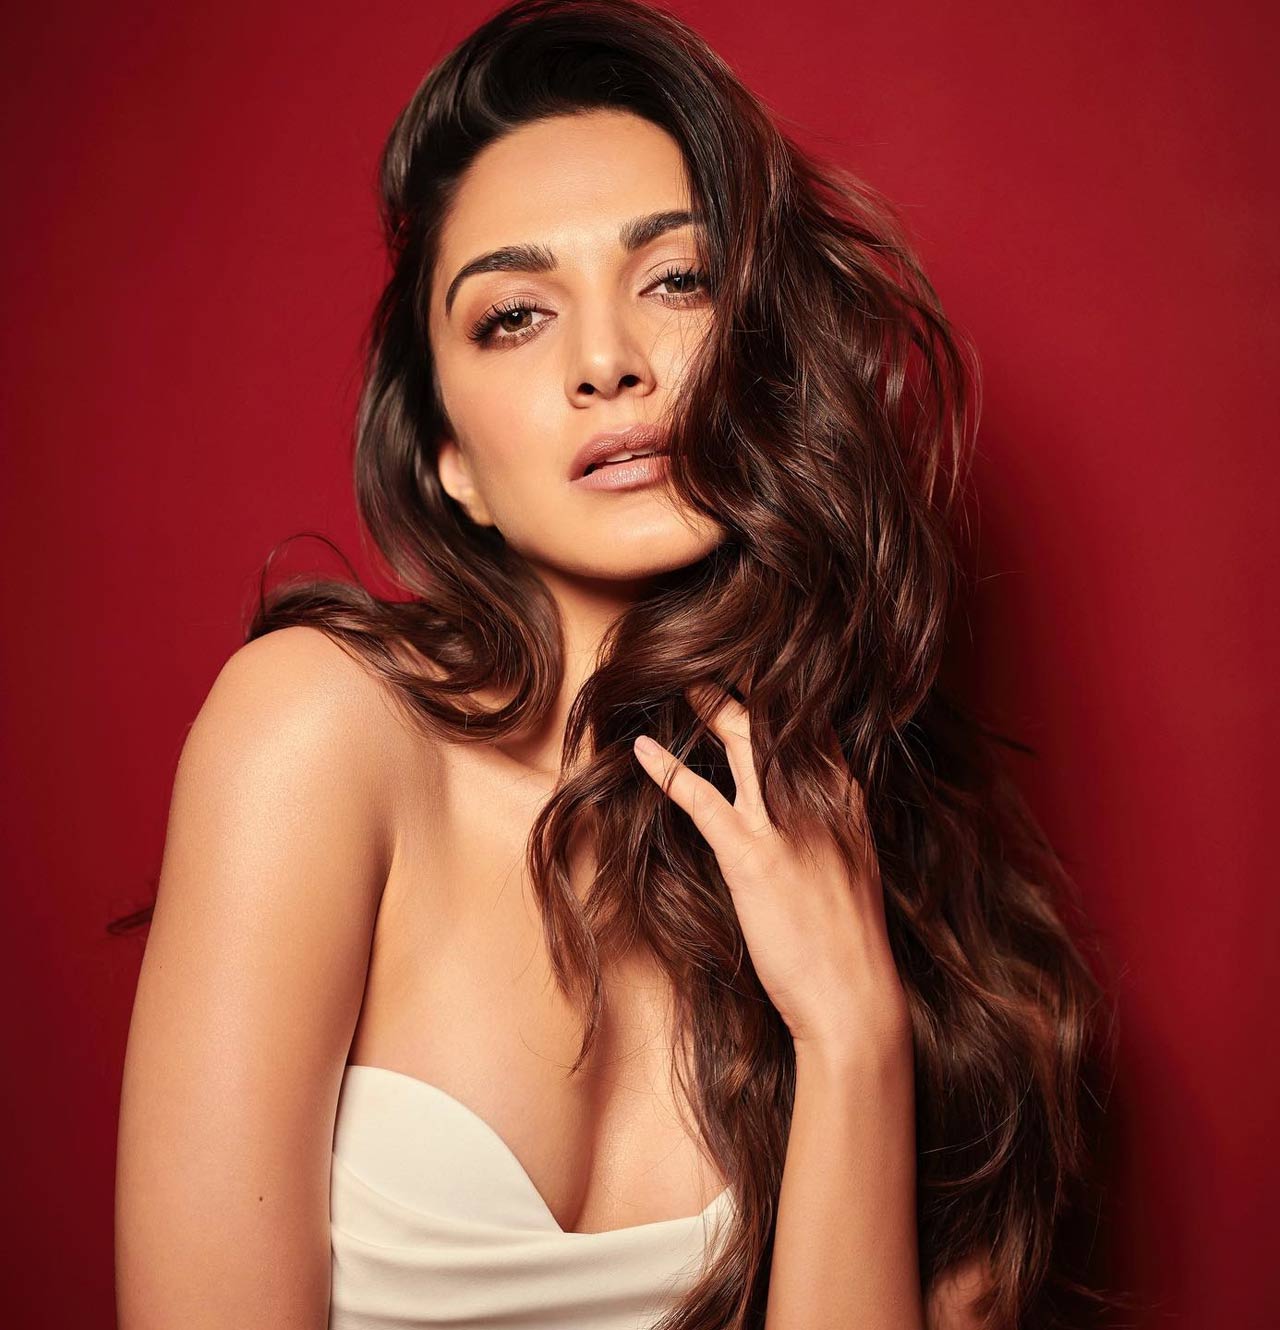 Bollywood actor Kiara Advani posted a couple of pictures on her social media where she looks stunning in a white dress. On Wednesday, the 'Bhool Bhulaiyaa 2' actor took to her Instagram handle and dropped a series of posts where she looks jaw-droppingly gorgeous